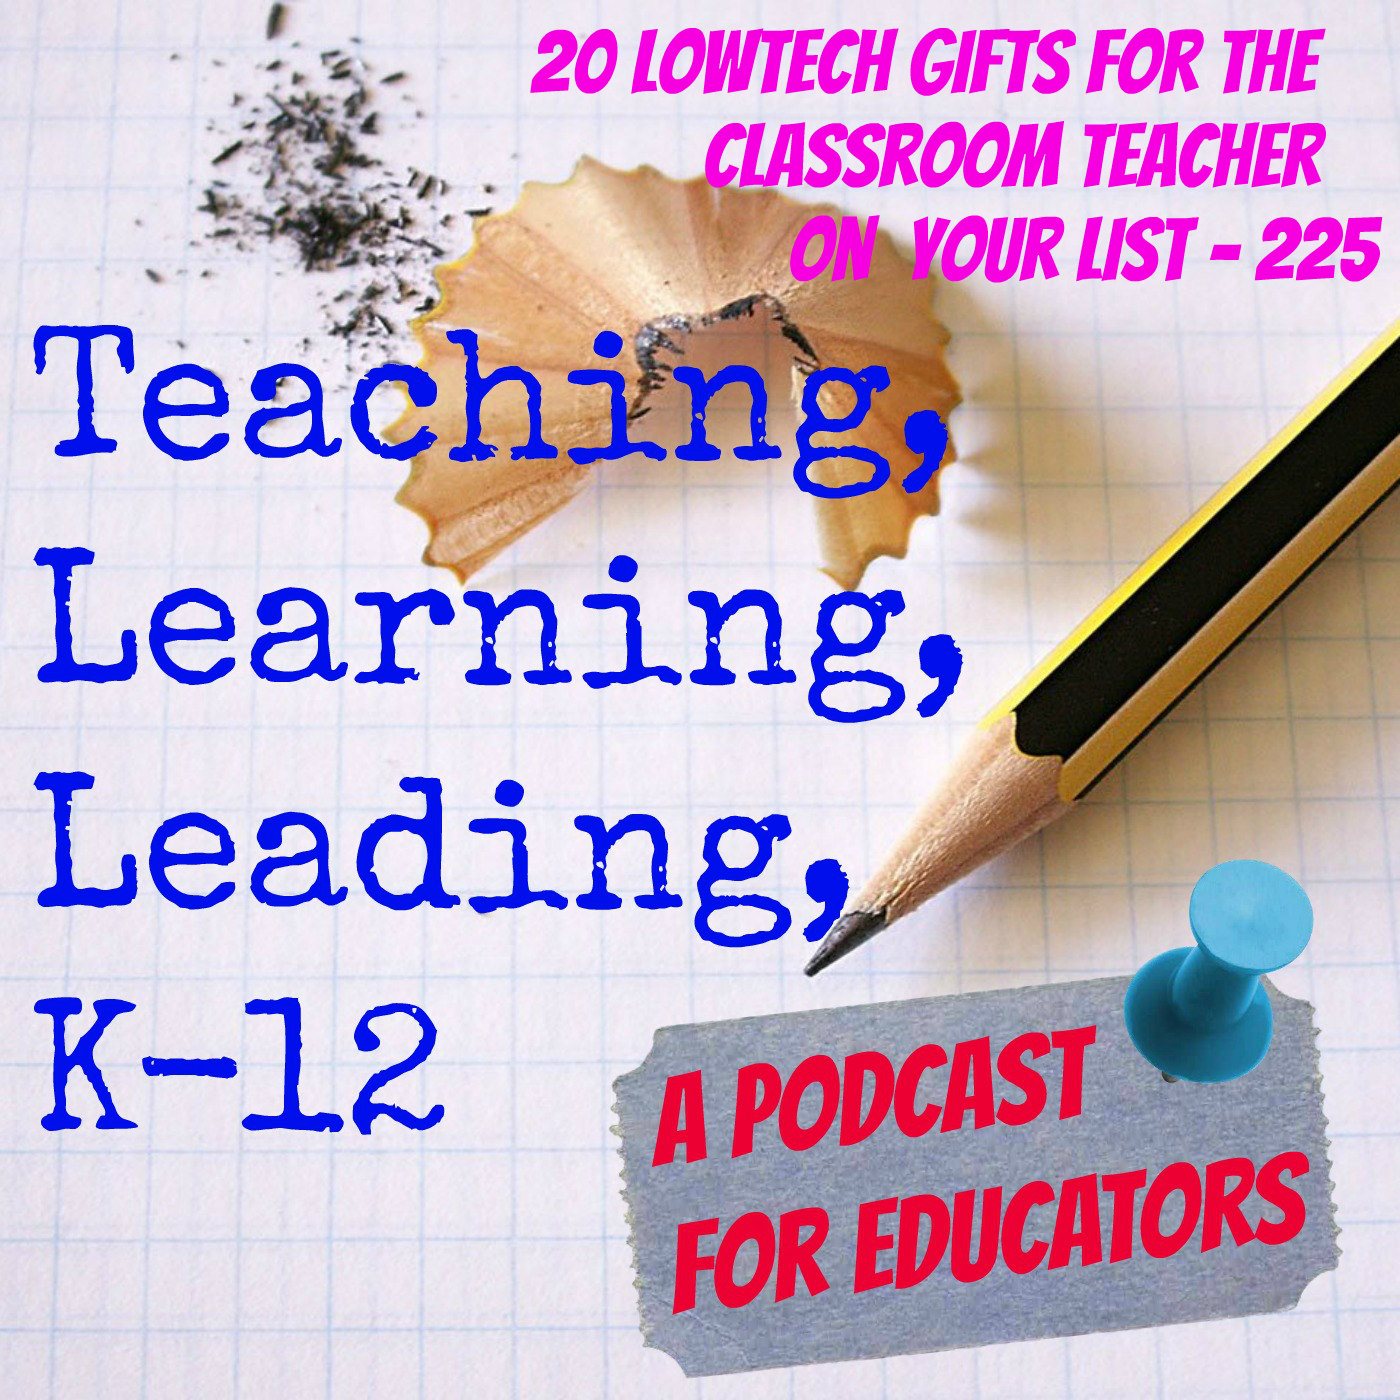 20 Low-tech Gifts for that Classroom Teacher on Your List - 225 Image